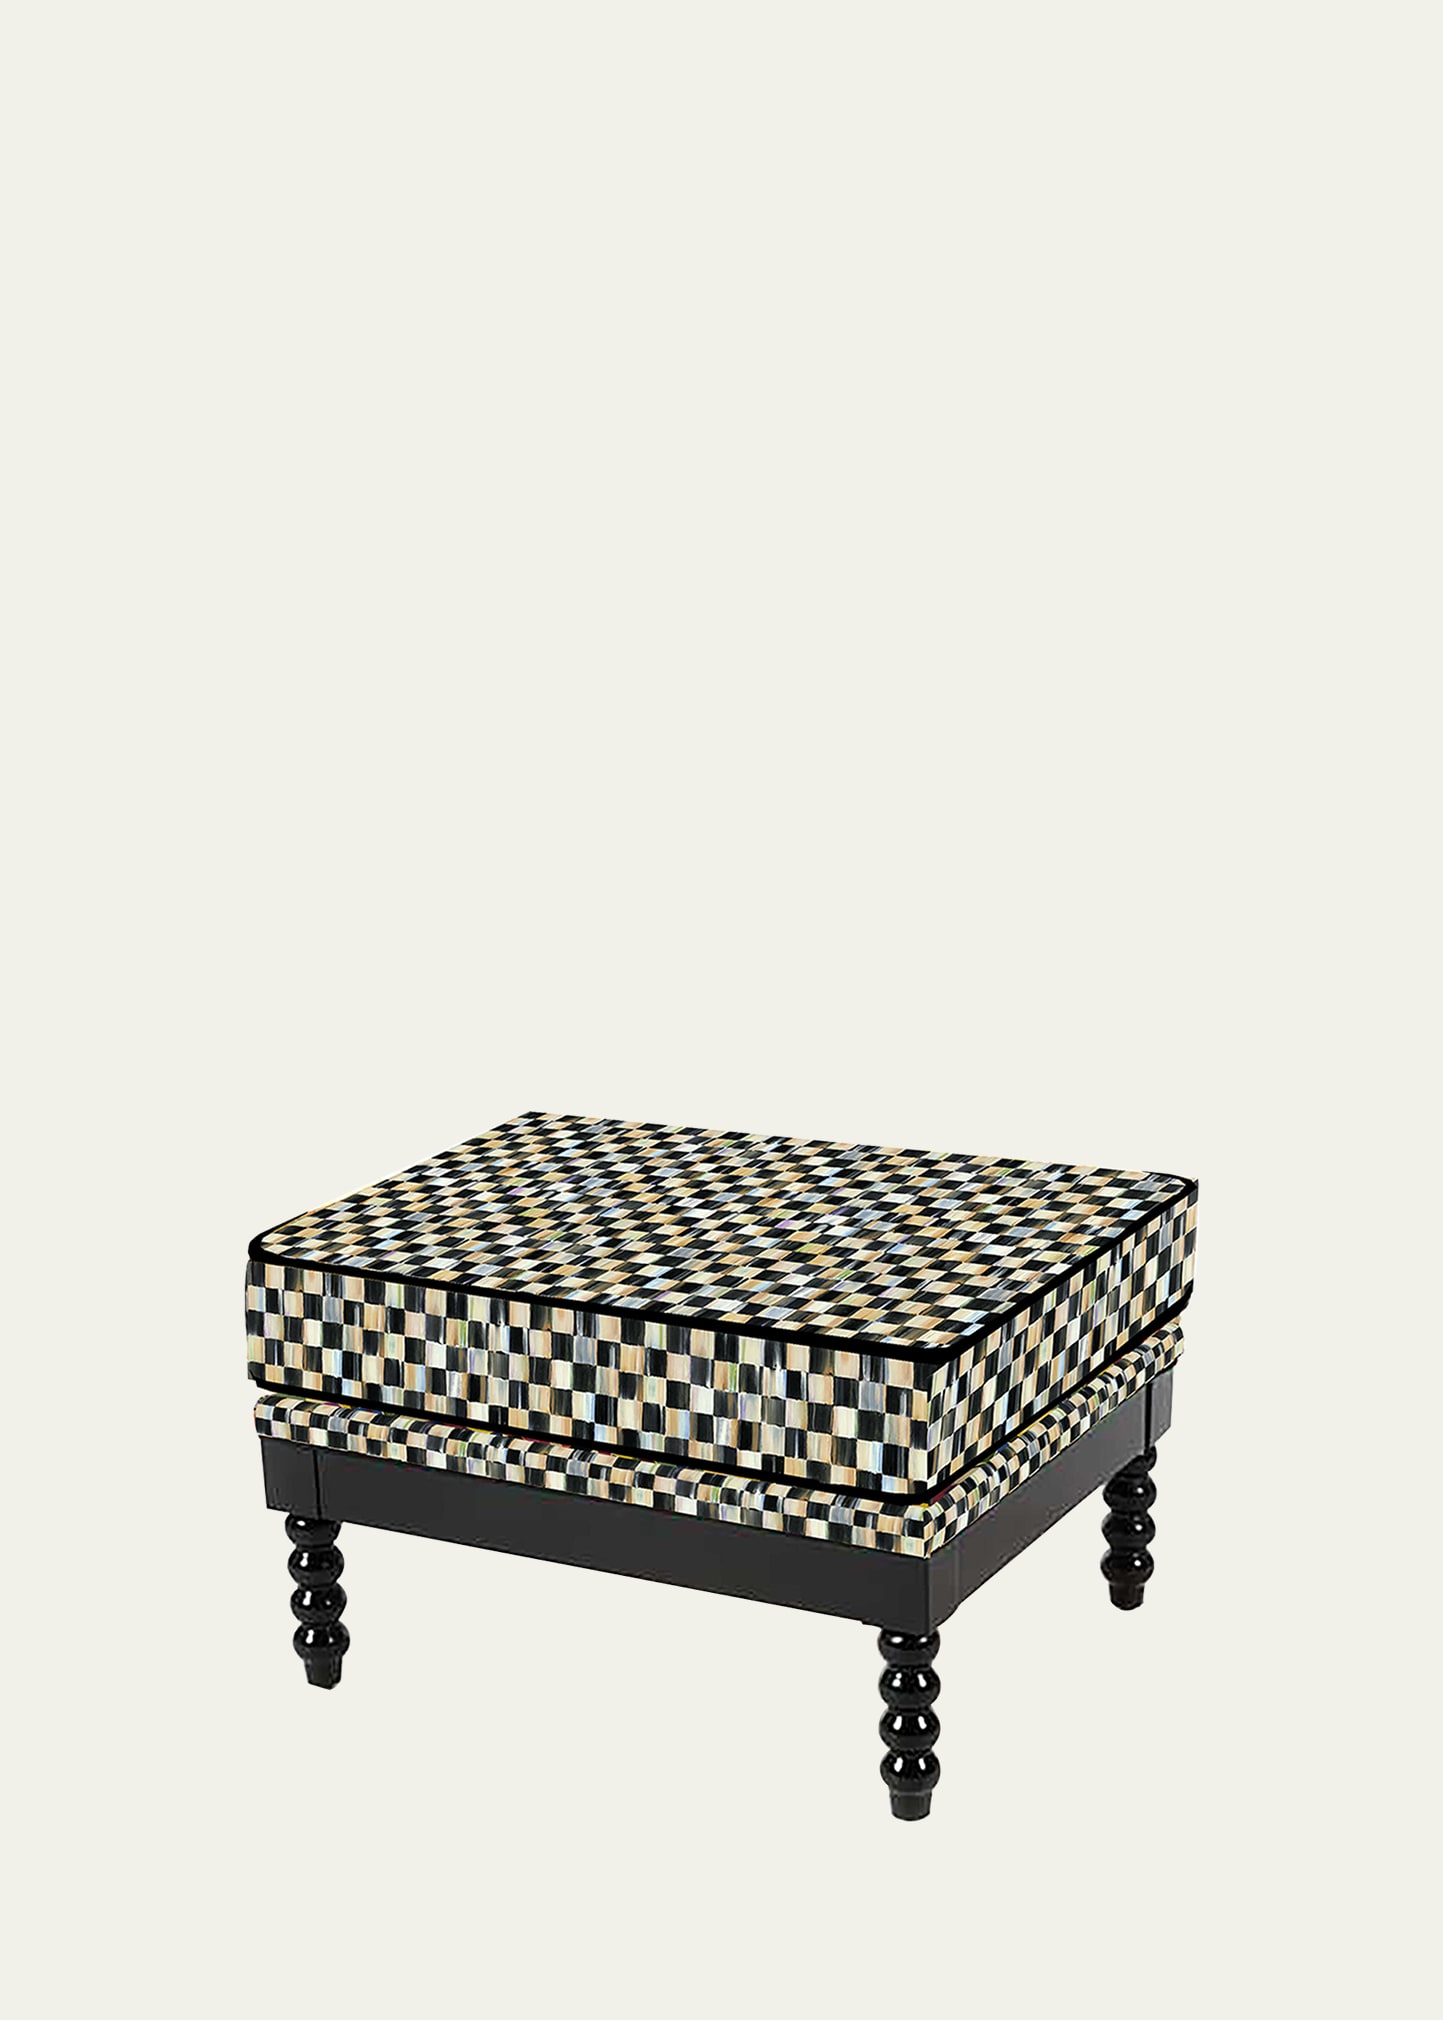 Mackenzie-childs Spindle Check Outdoor Ottoman